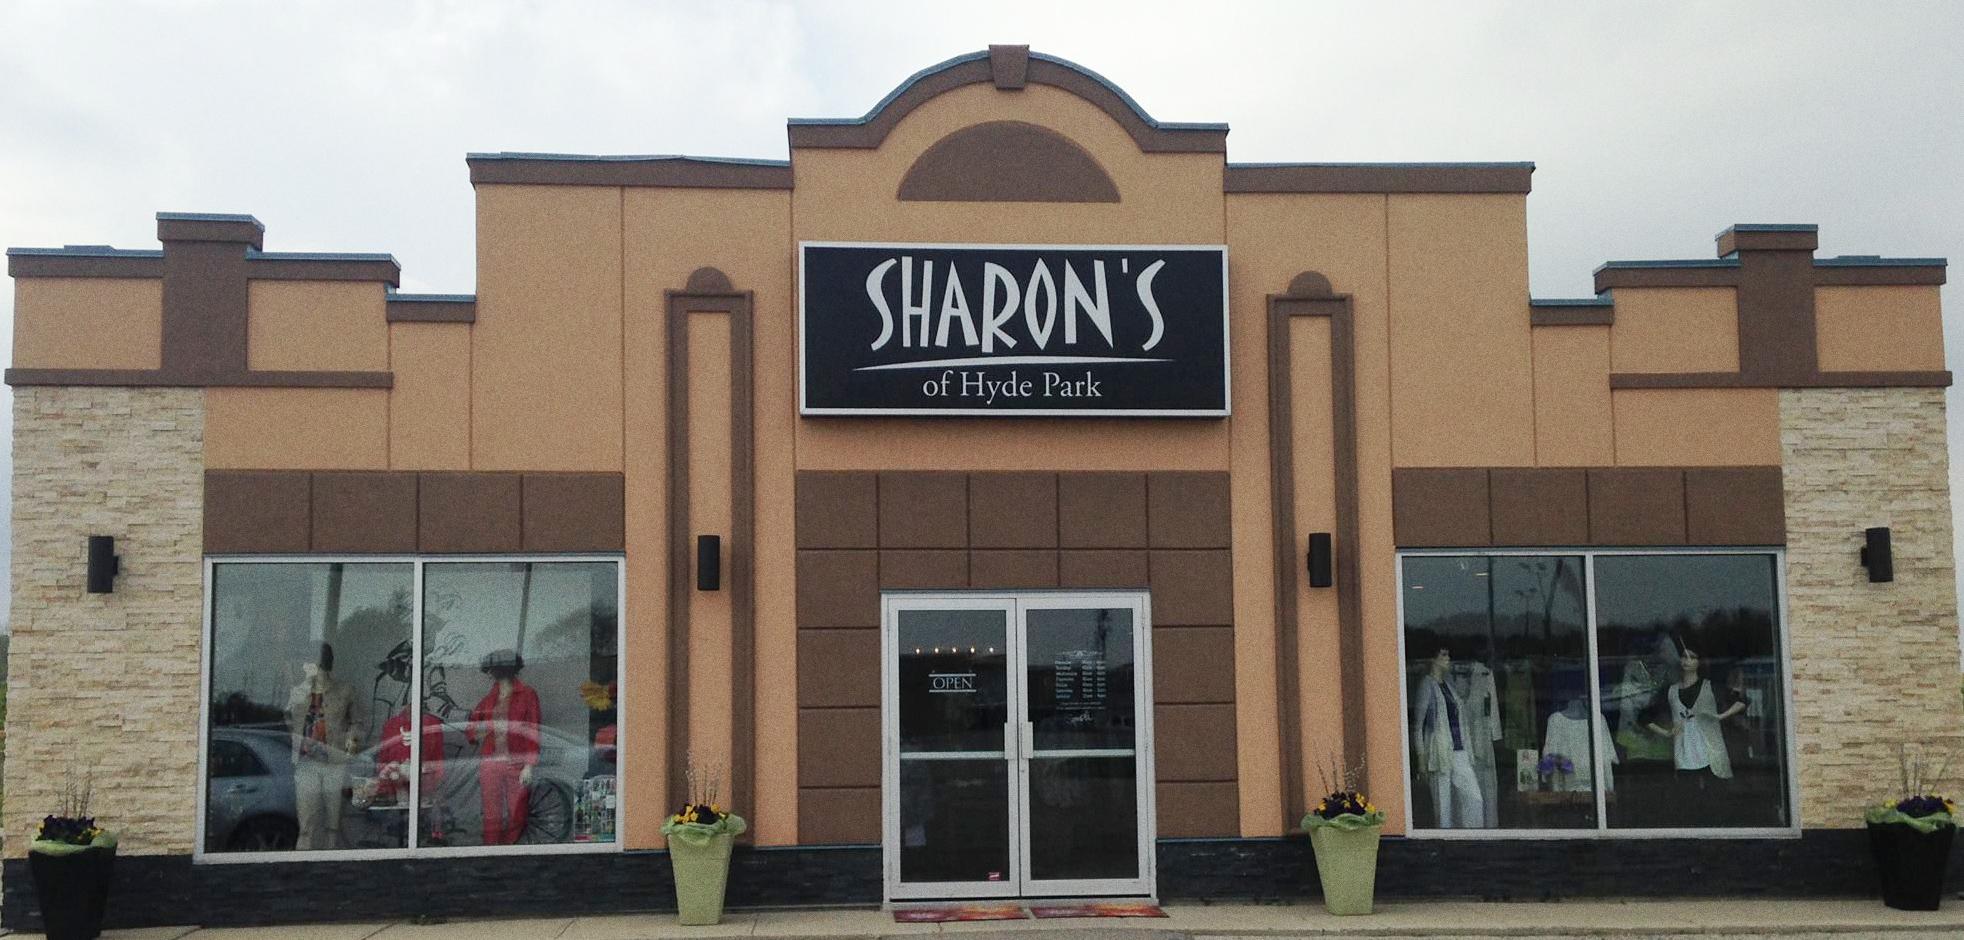 Sharon's of Hyde Park